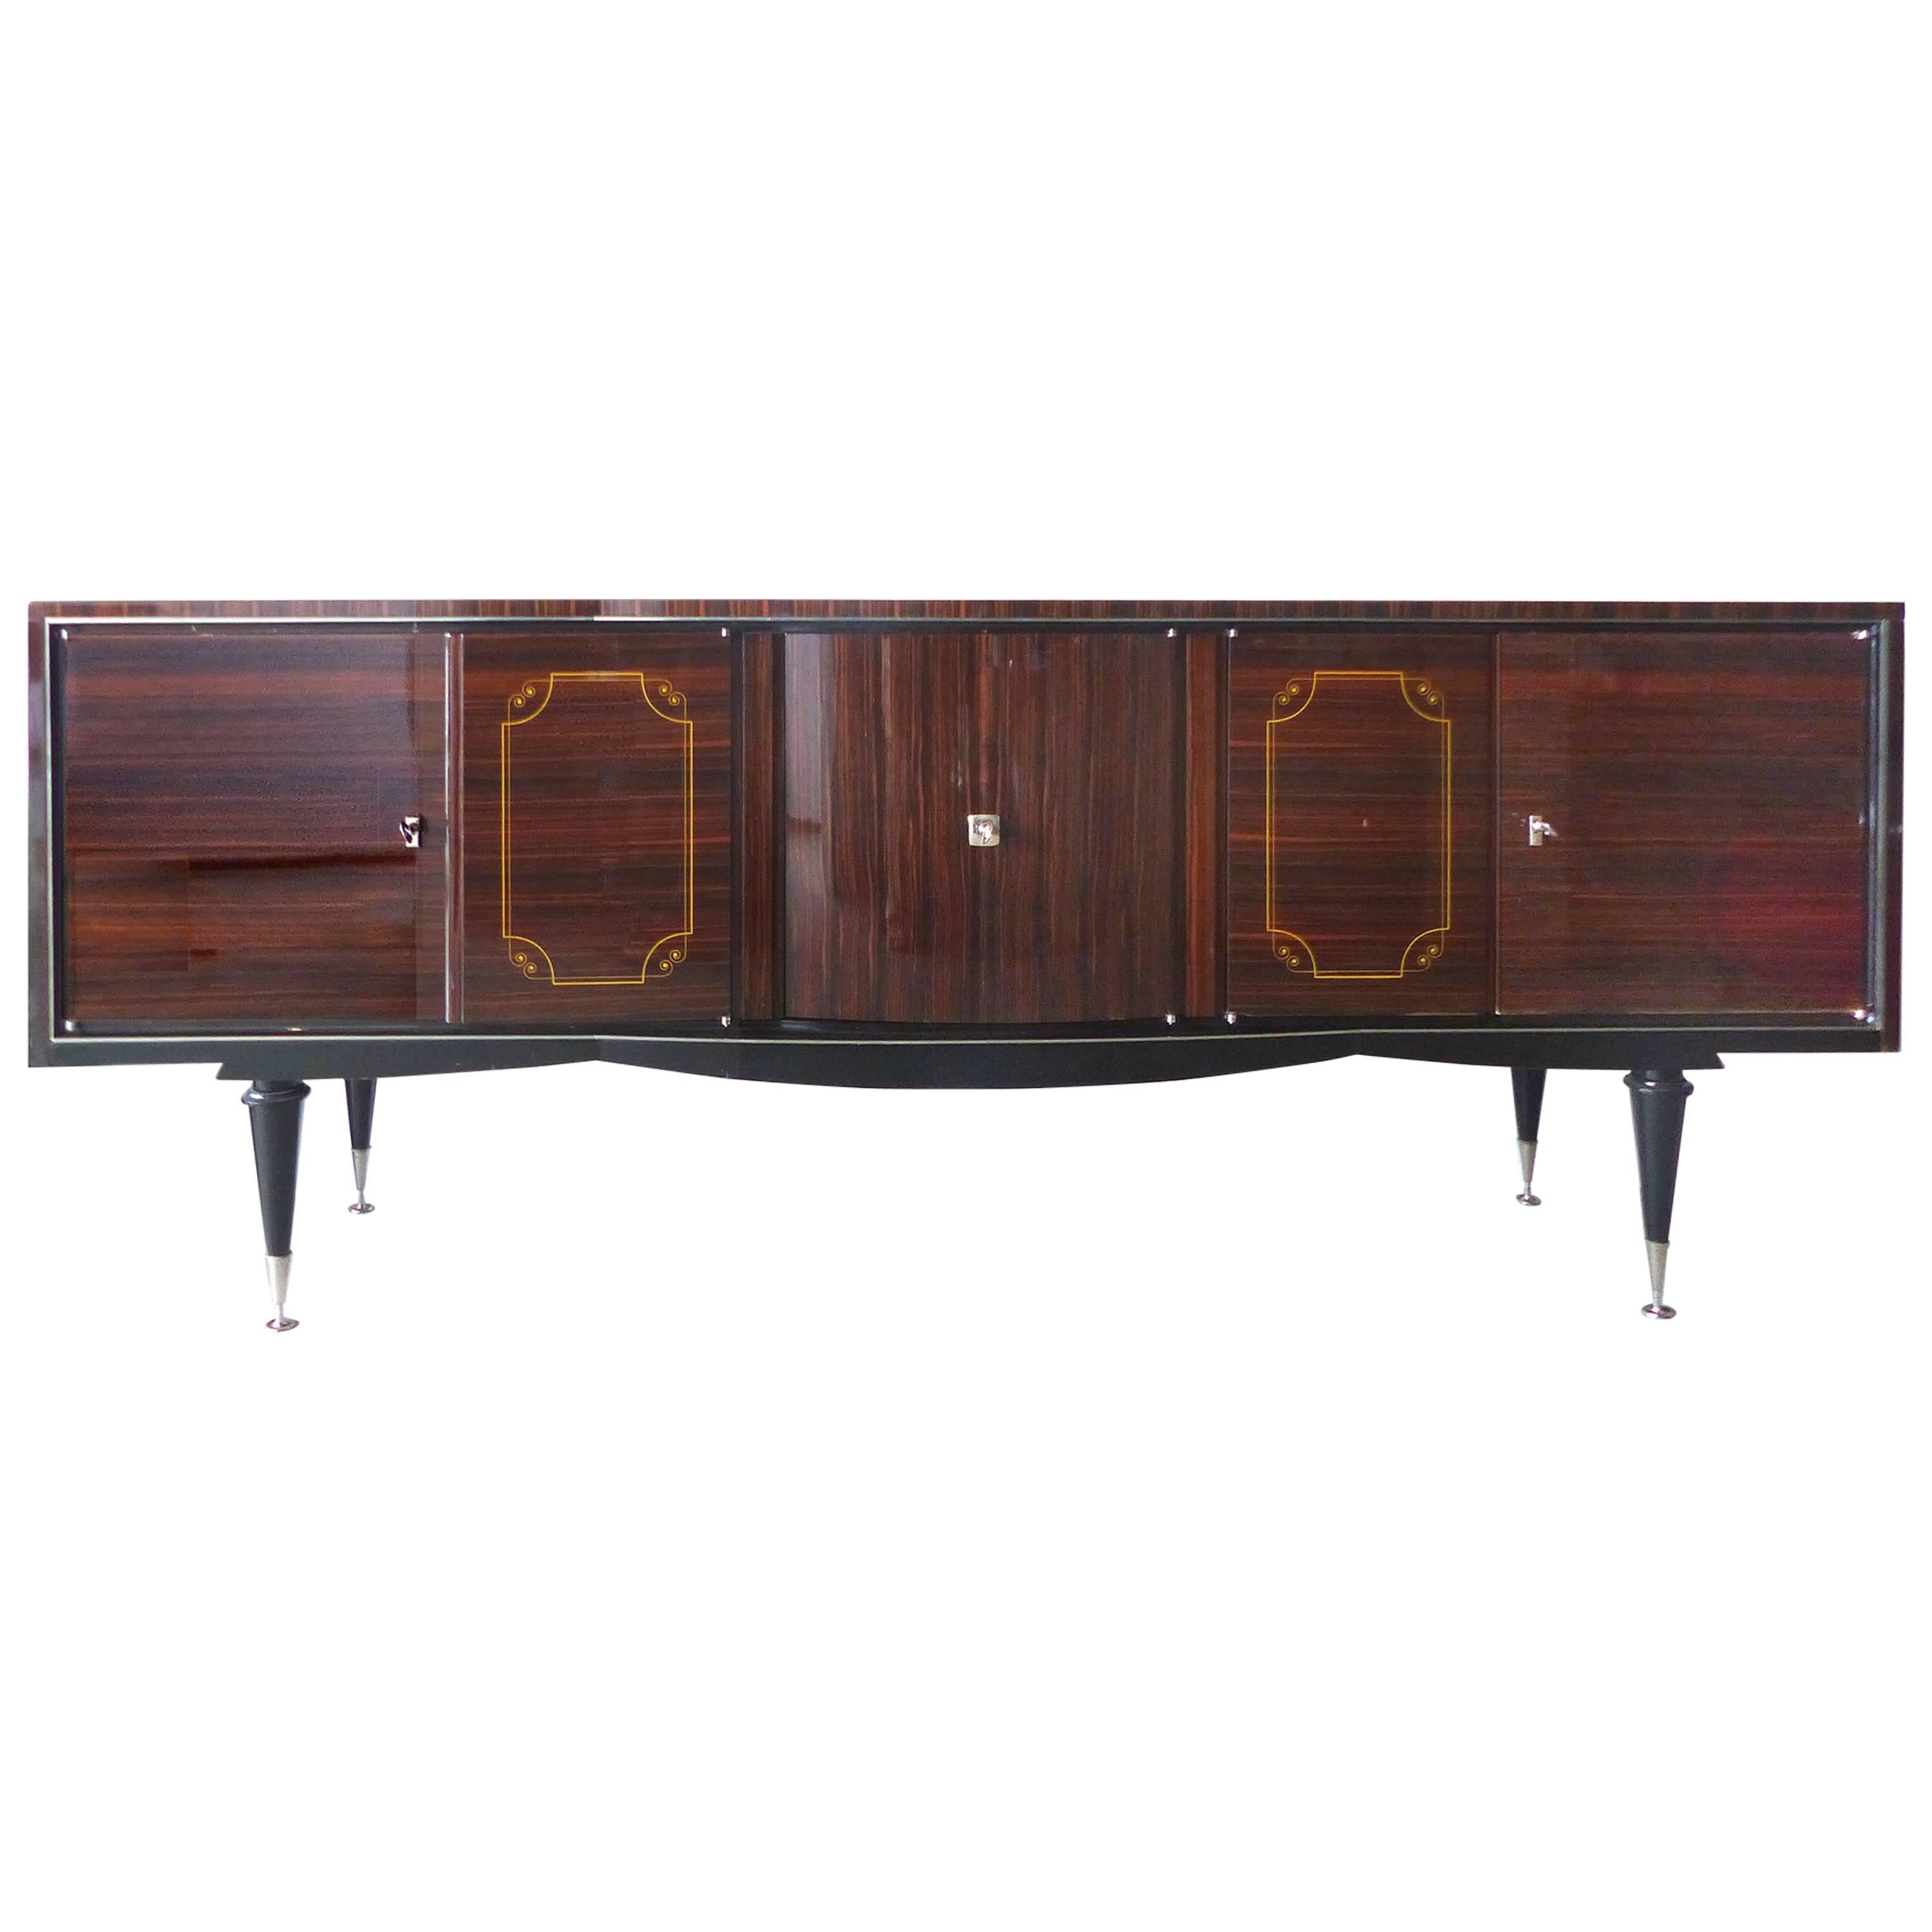 1930s French Art Deco Macassar and Ebony Credenza with Bar Compartment